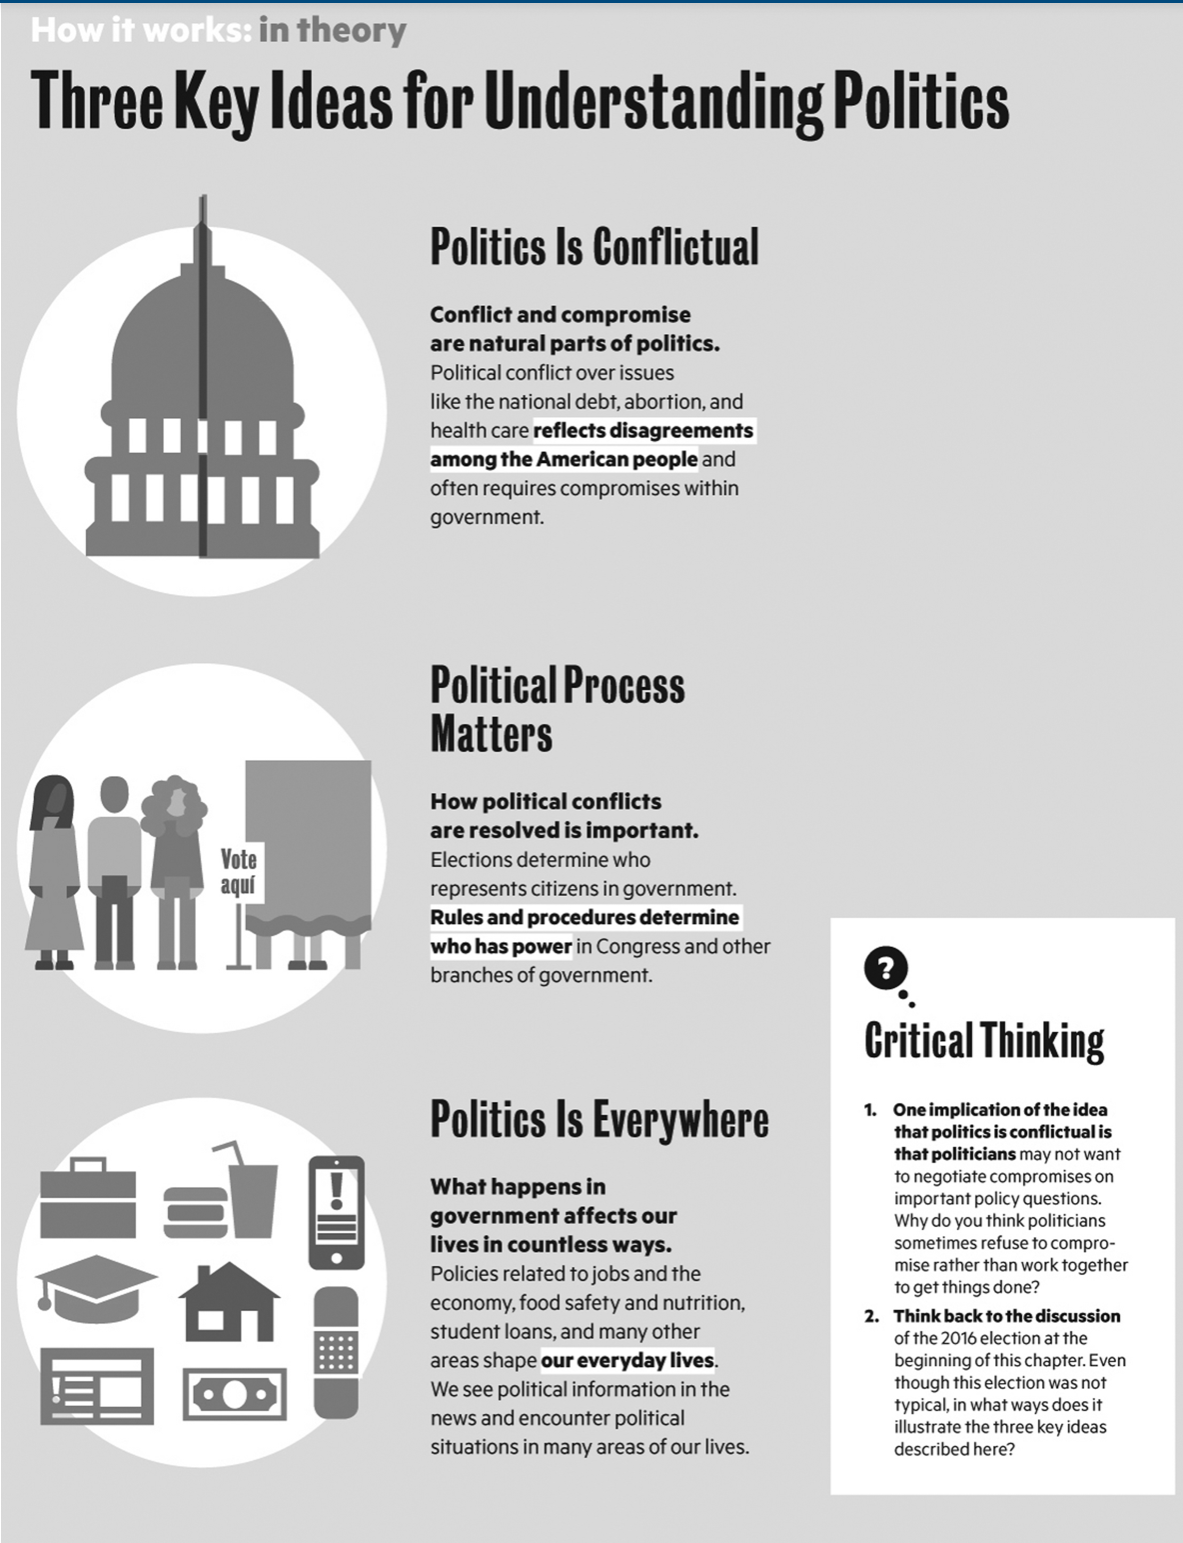 How it works: in theory
Three Key Ideas for Understanding Politics
Politics Is Conflictual
Conflict and compromise
are natural parts of politics.
Political conflict over issues
like the national debt, abortion, and
health care reflects disagreements
among the American people and
often requires compromises within
government.
Political Process
Matters
How political conflicts
are resolved is important.
Vote
aquí
Elections determine who
represents citizens in government.
Rules and procedures determine
who has power in Congress and other
branches of government.
Gritical Thinking
Politics Is Everywhere
1. One implication of the idea
that politics is conflictual is
that politicians may not want
to negotiate compromises on
important policy questions.
Why do you think politicians
sometimes refuse to compro-
mise rather than work together
to get things done?
2. Think back to the discussion
What happens in
government affects our
lives in countless ways.
Policies related to jobs and the
economy, food safety and nutrition,
student loans, and many other
areas shape our everyday lives.
We see political information in the
news and encounter political
situations in many areas of our lives.
of the 2016 election at the
beginning of this chapter. Even
though this election was not
typical, in what ways does it
illustrate the three key ideas
described here?
